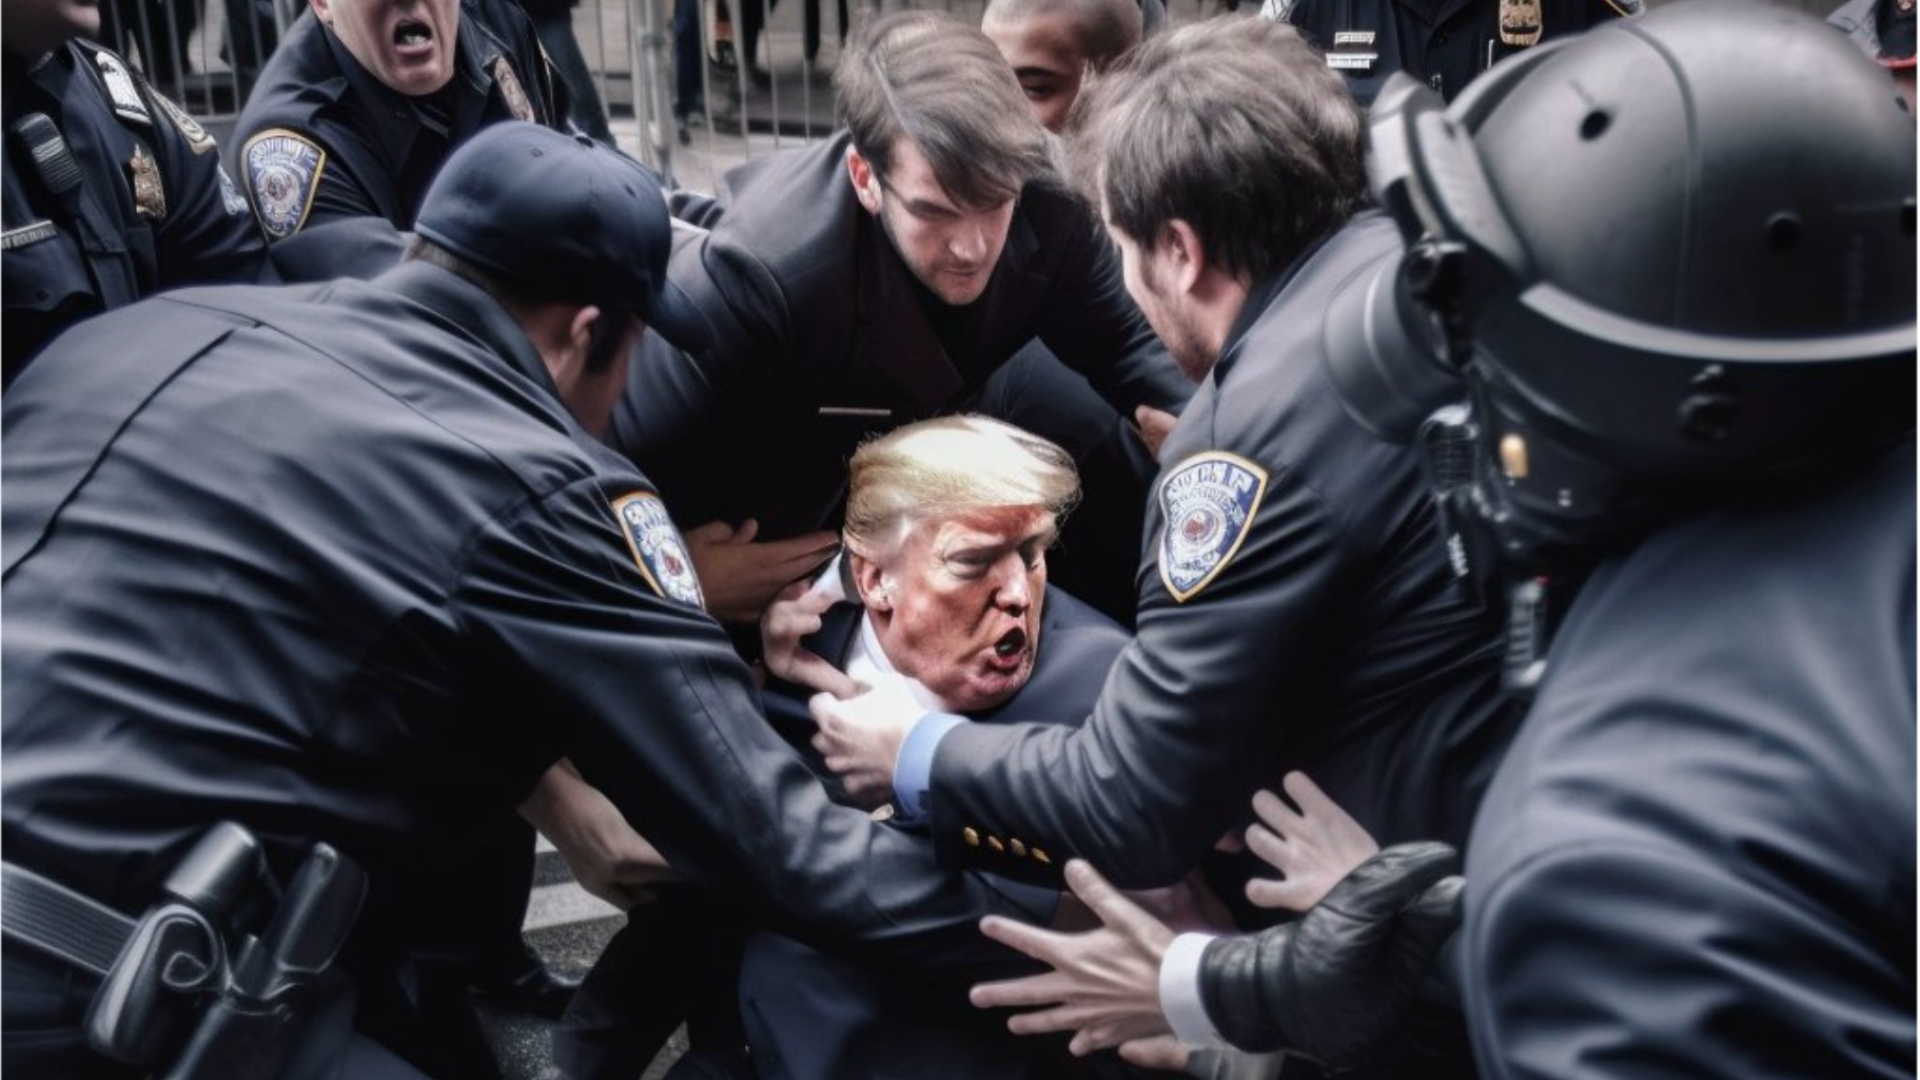 1 'Killing Me!' Trump Haters Having a Field Day With AI-Generated Photos of Cops Nailing and Jailing Trump Mug Shot takedown